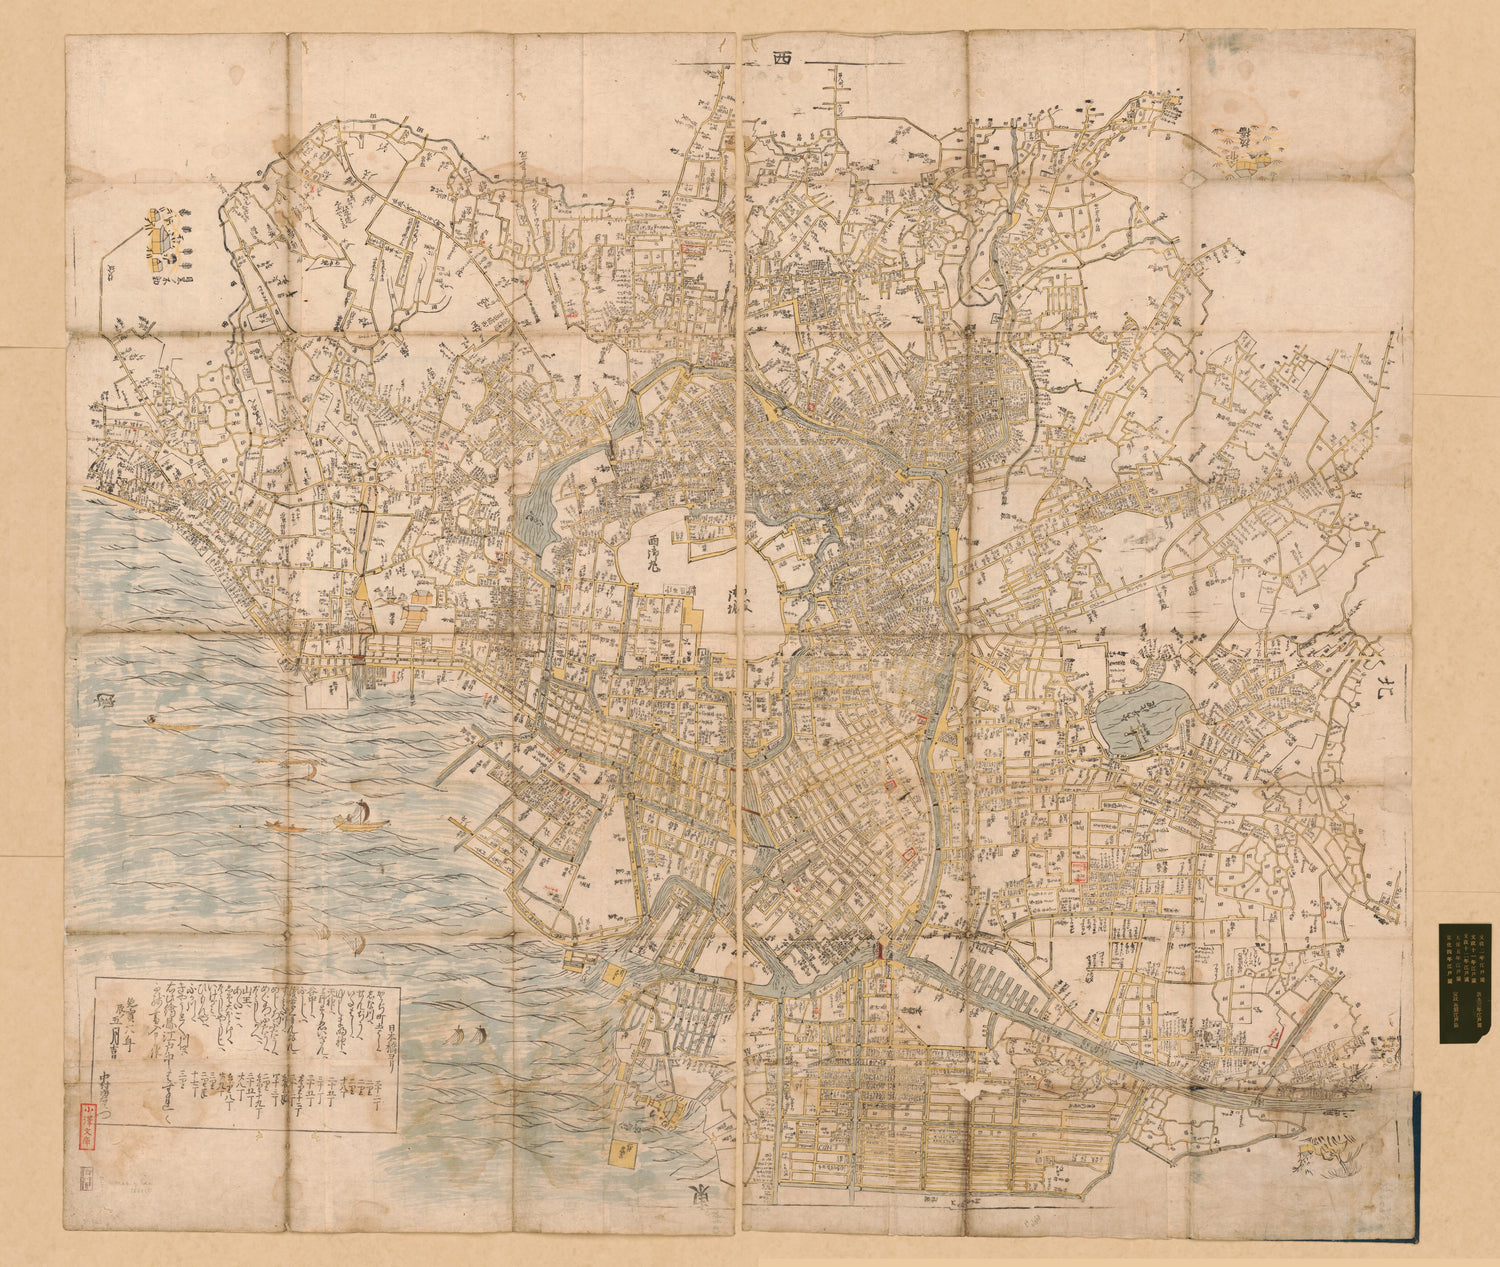 This old map of Edo ōezu, Eiri (江戶大絵図, 絵入 /) from 1676 was created by Ichiemon Nakamura in 1676